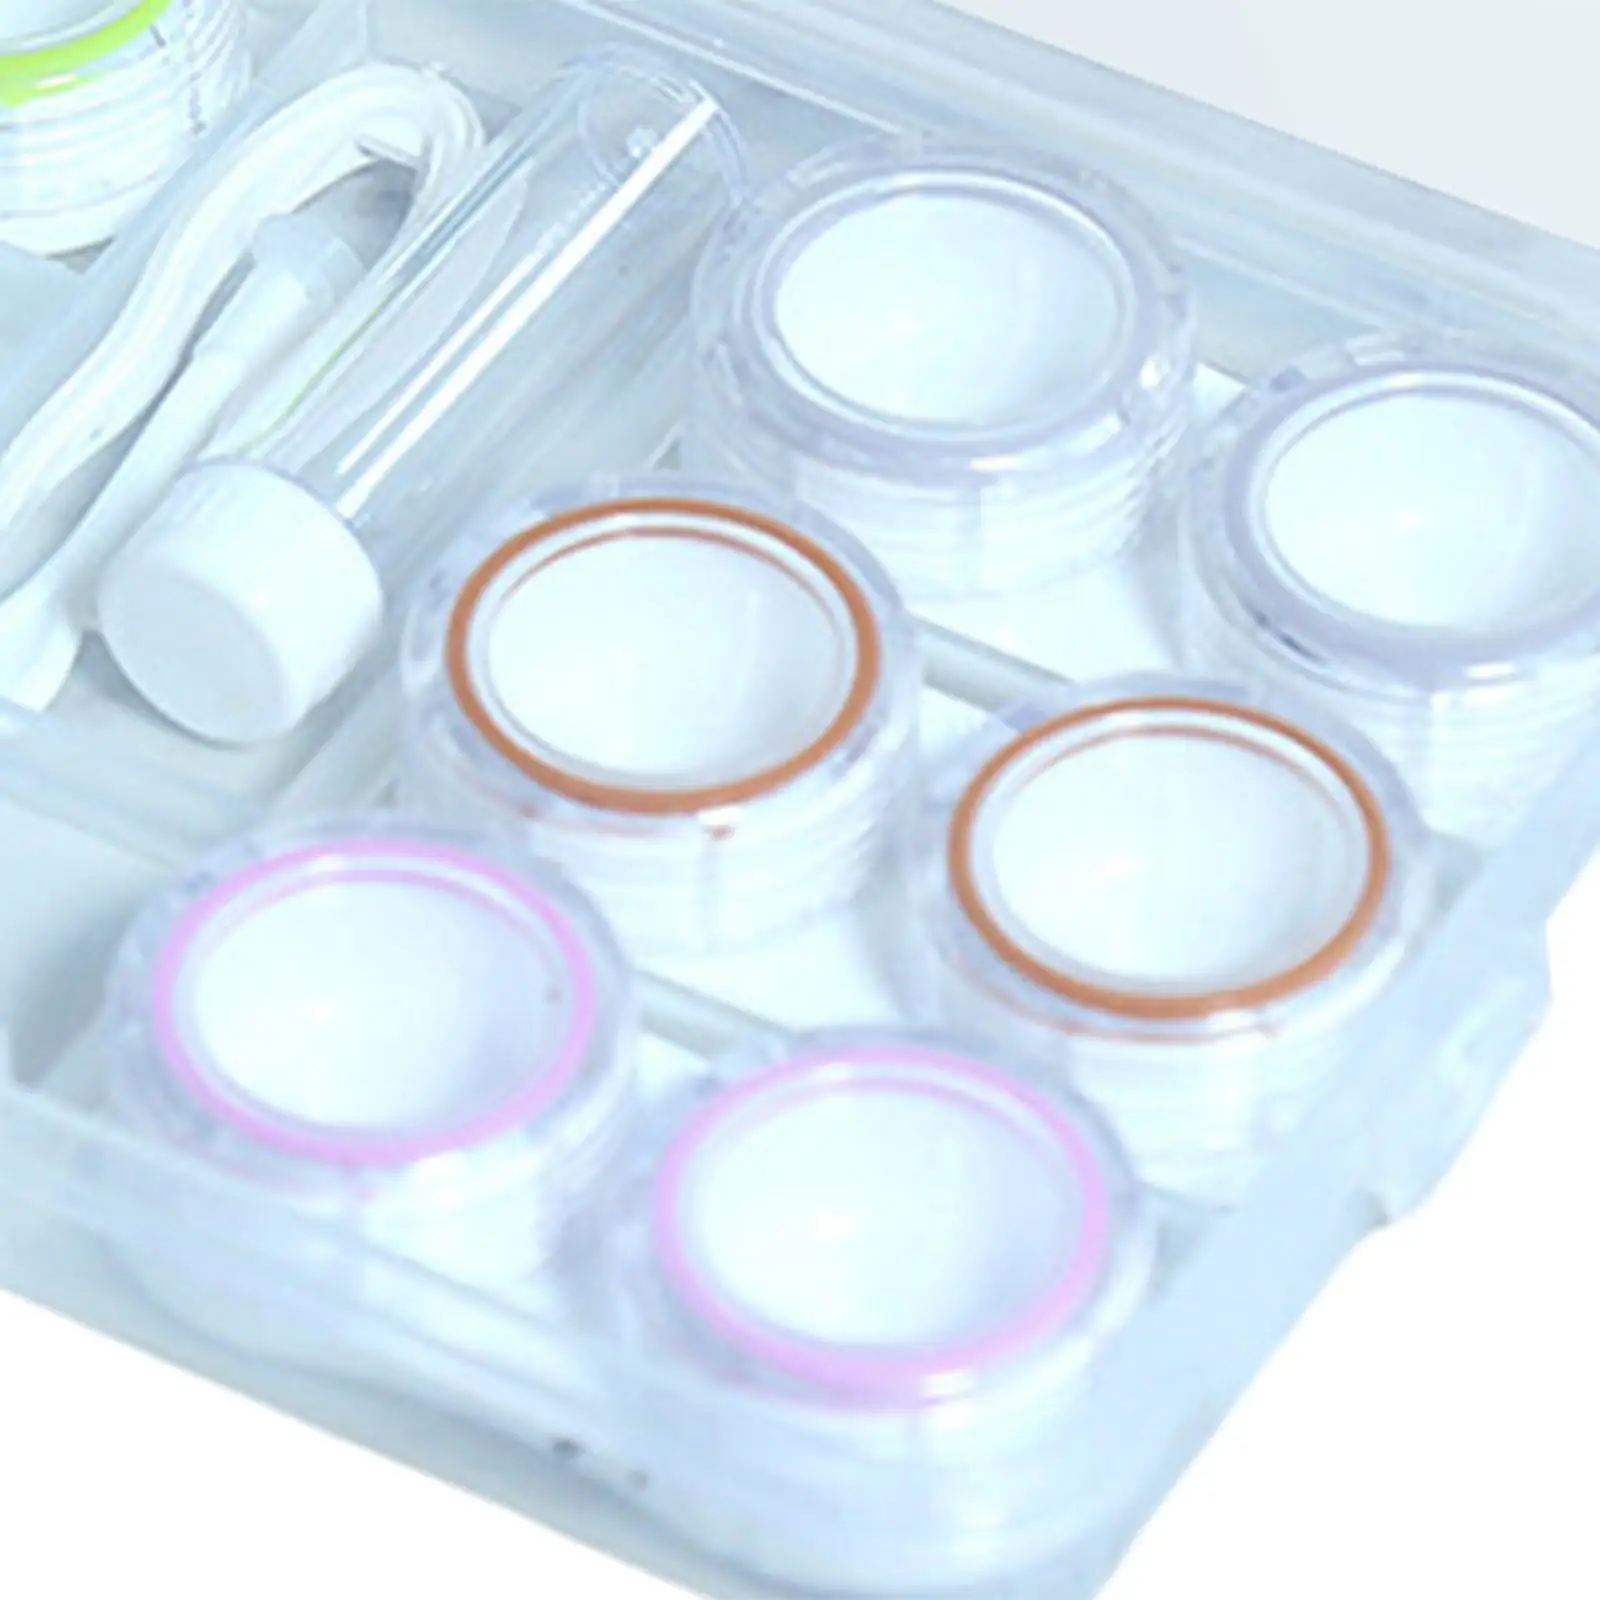 2-4pack Travel 6 Pairs Contact Lens Case Set Keeping Contact Lens Clean and